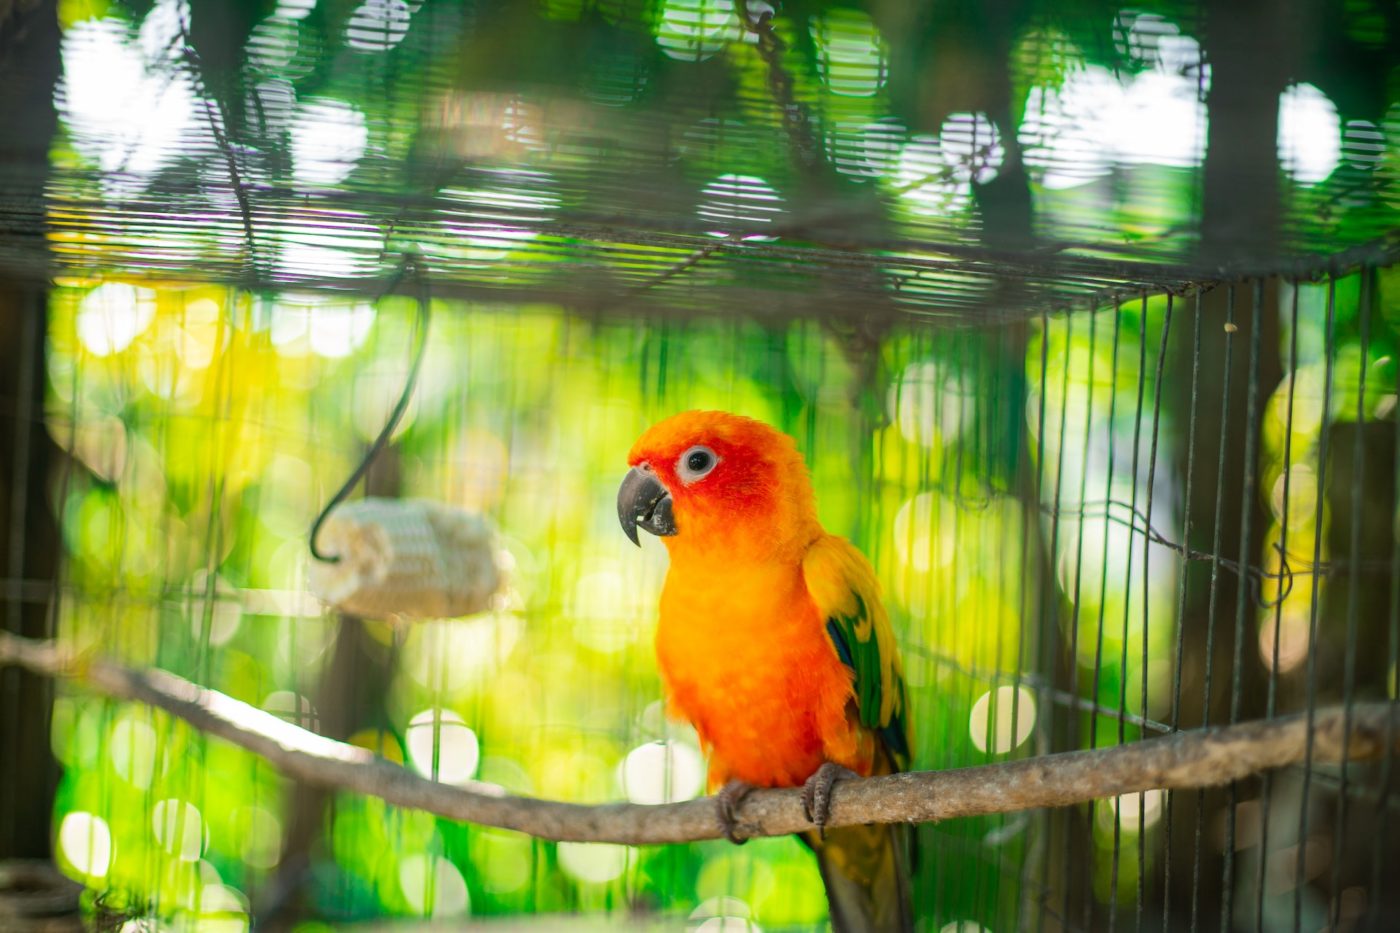 6 Signs That Your Child is Old Enough to Care For an Exotic Pet